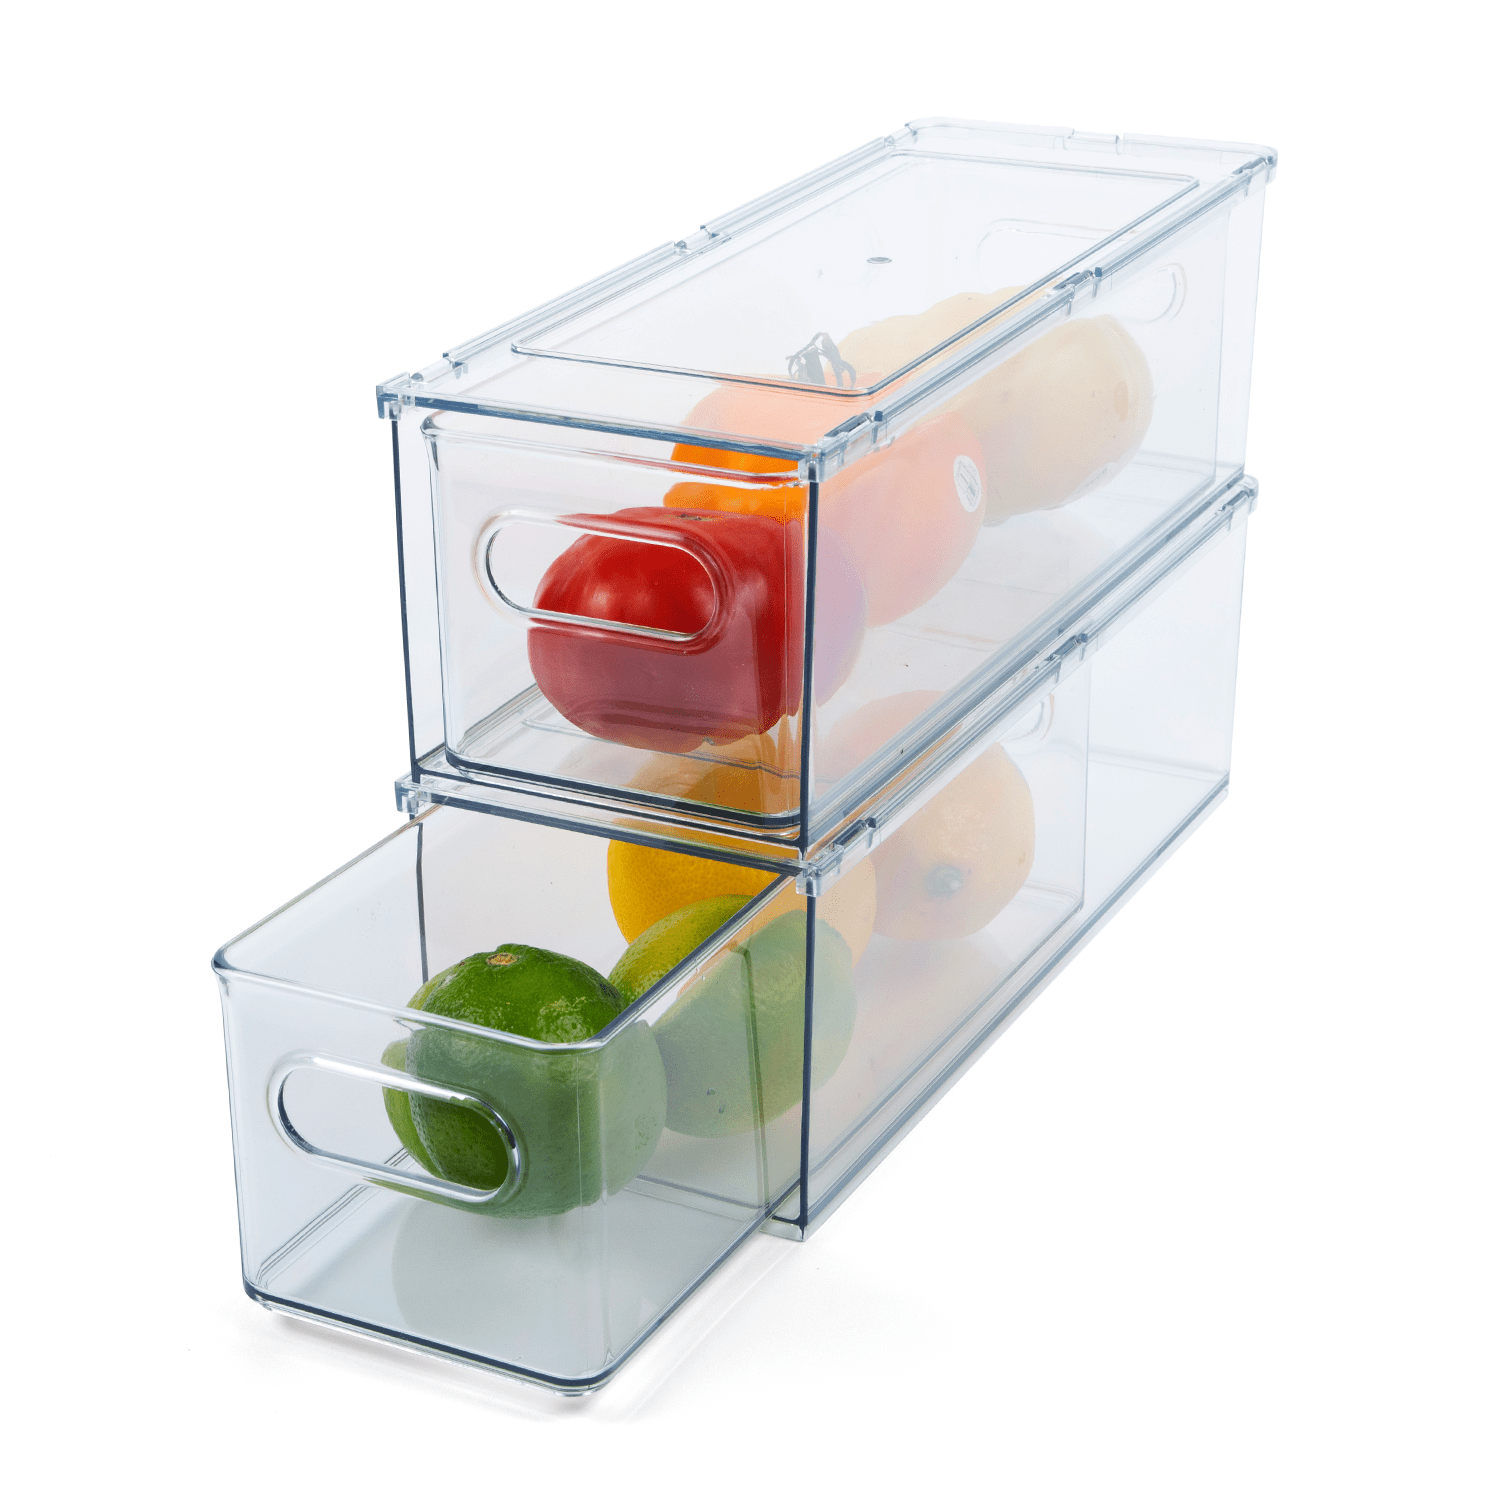 Tidy Tools Refrigerator Organizer Bins with Pull-out Drawer with Handles, 2 Pack